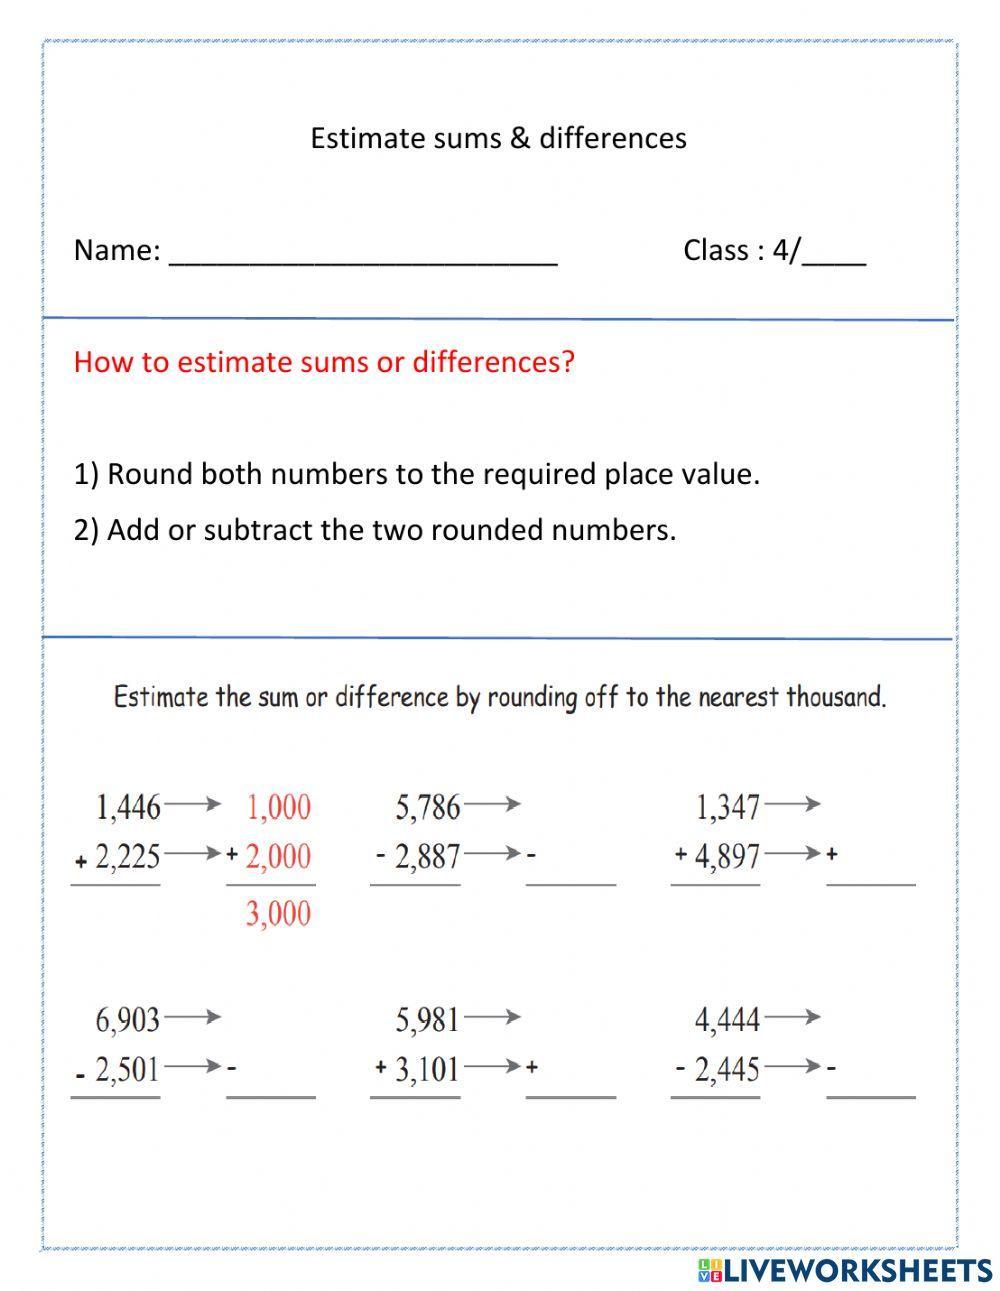 Estimate sums & difference